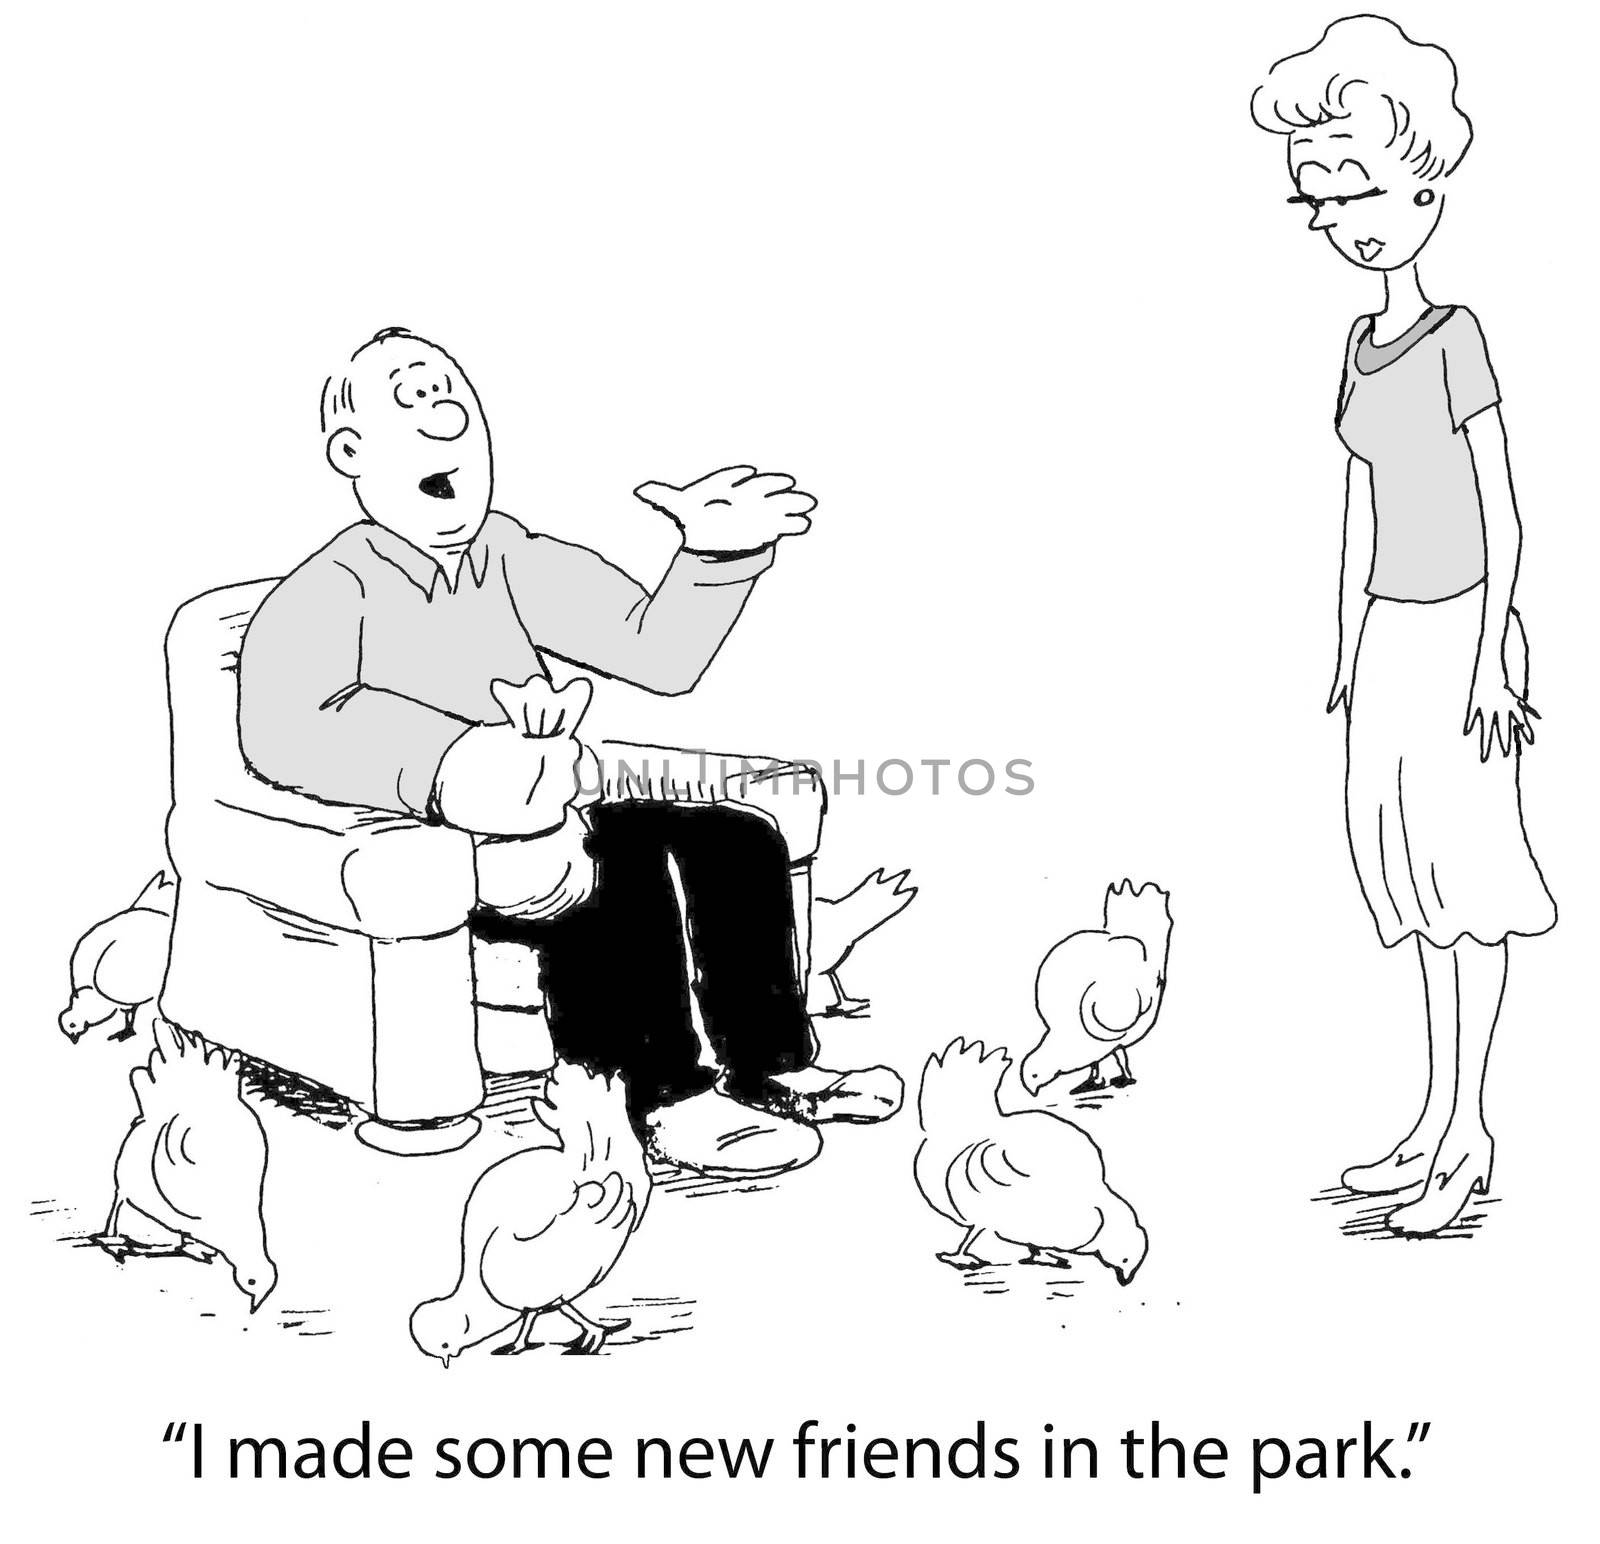 "I made some new friends in the park."